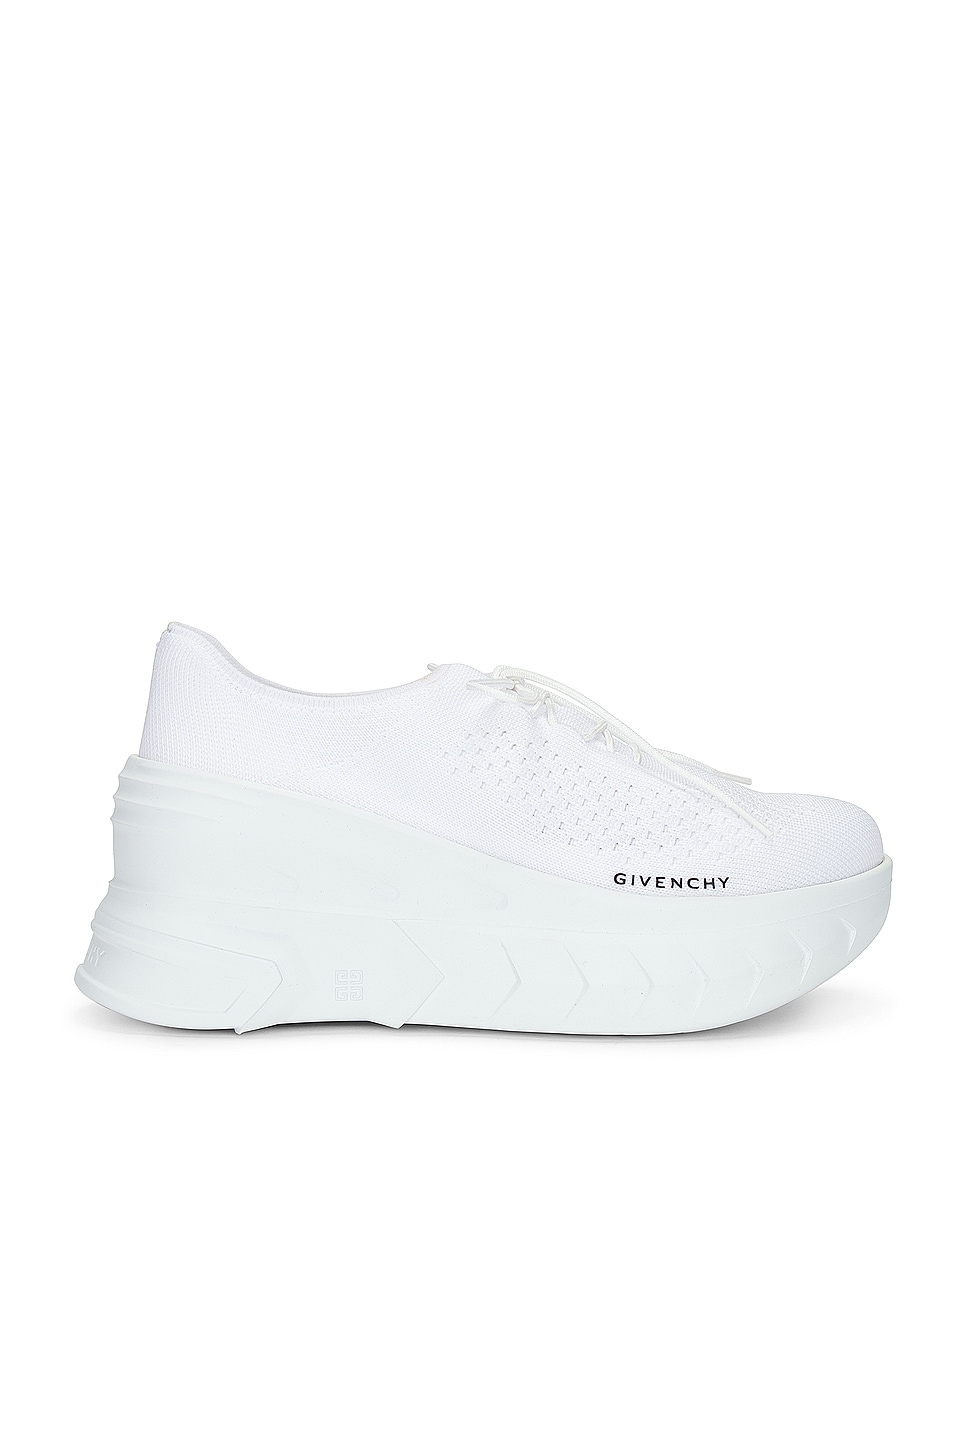 Image 1 of Givenchy Marshmallow Wedge Sneaker in White